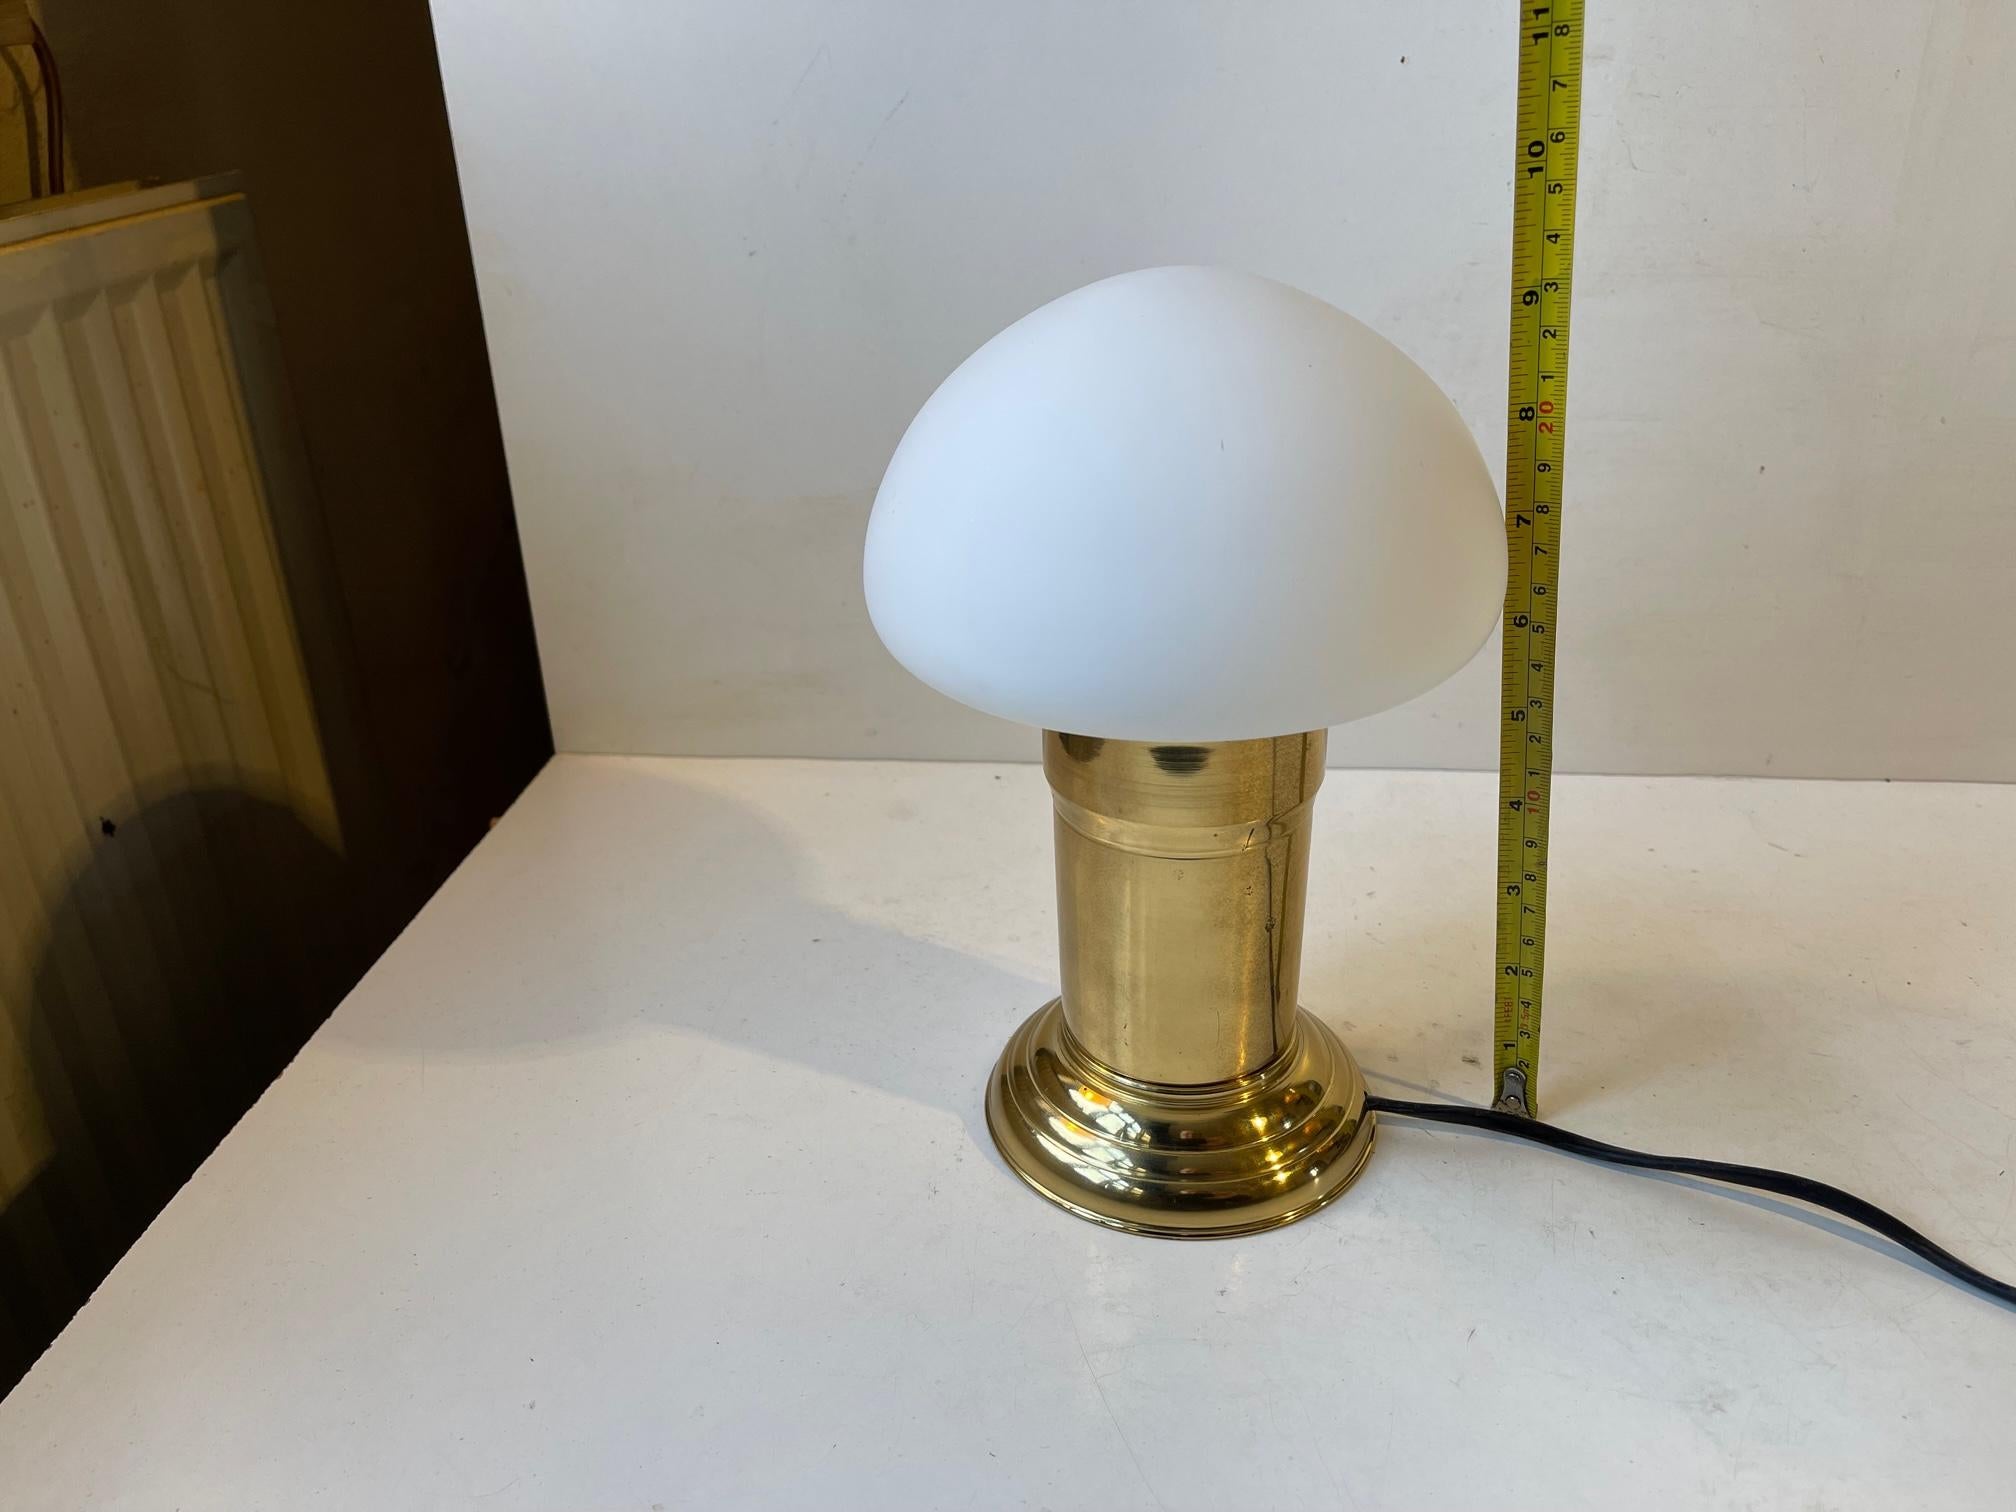 Scandinavian Mushroom Table Lamp in Brass and White Glass, 1970s For Sale 3